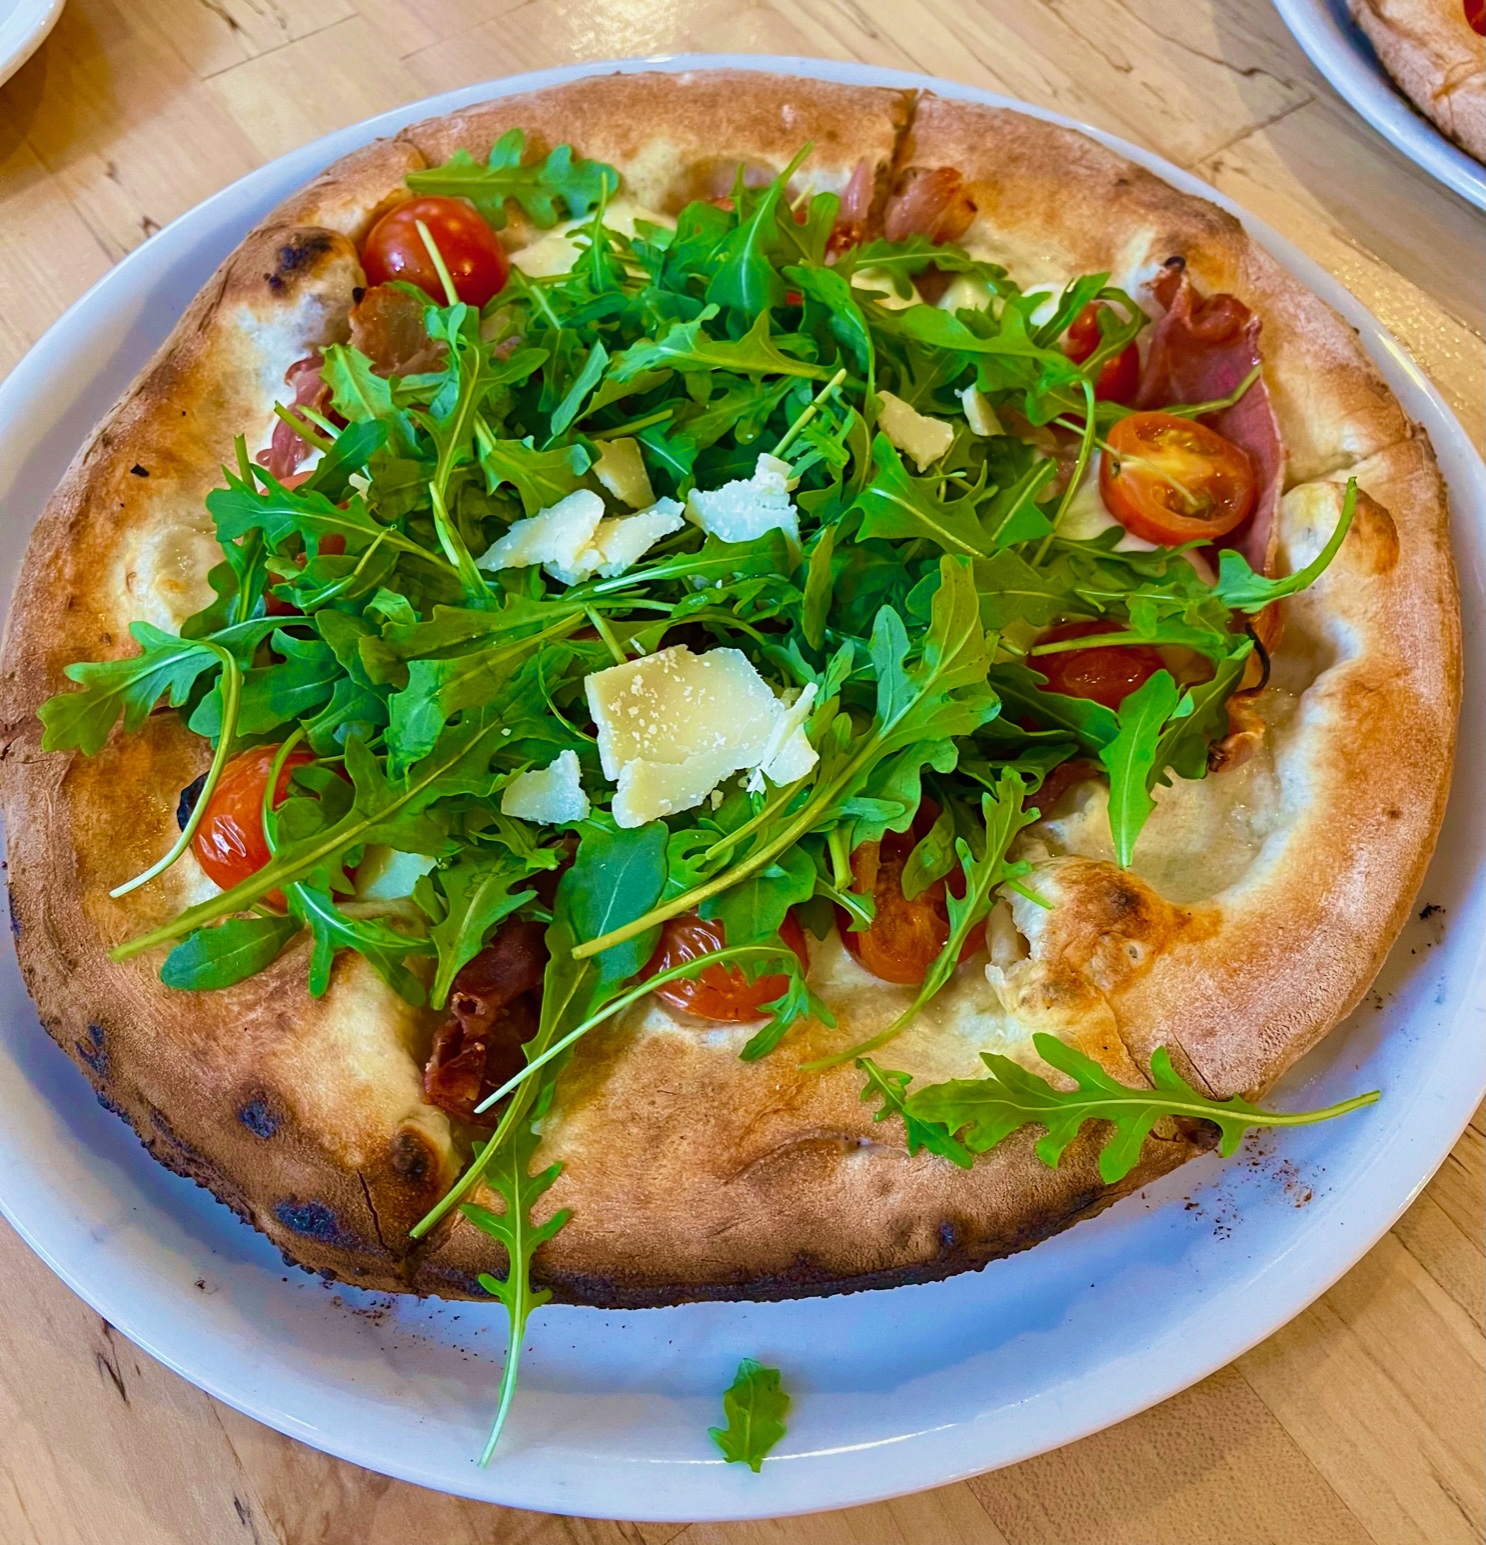 On a white plate, there is a sauceless pizza topped with shaved Parm and lots of arugula. Photo by Stephanie Wheatley.